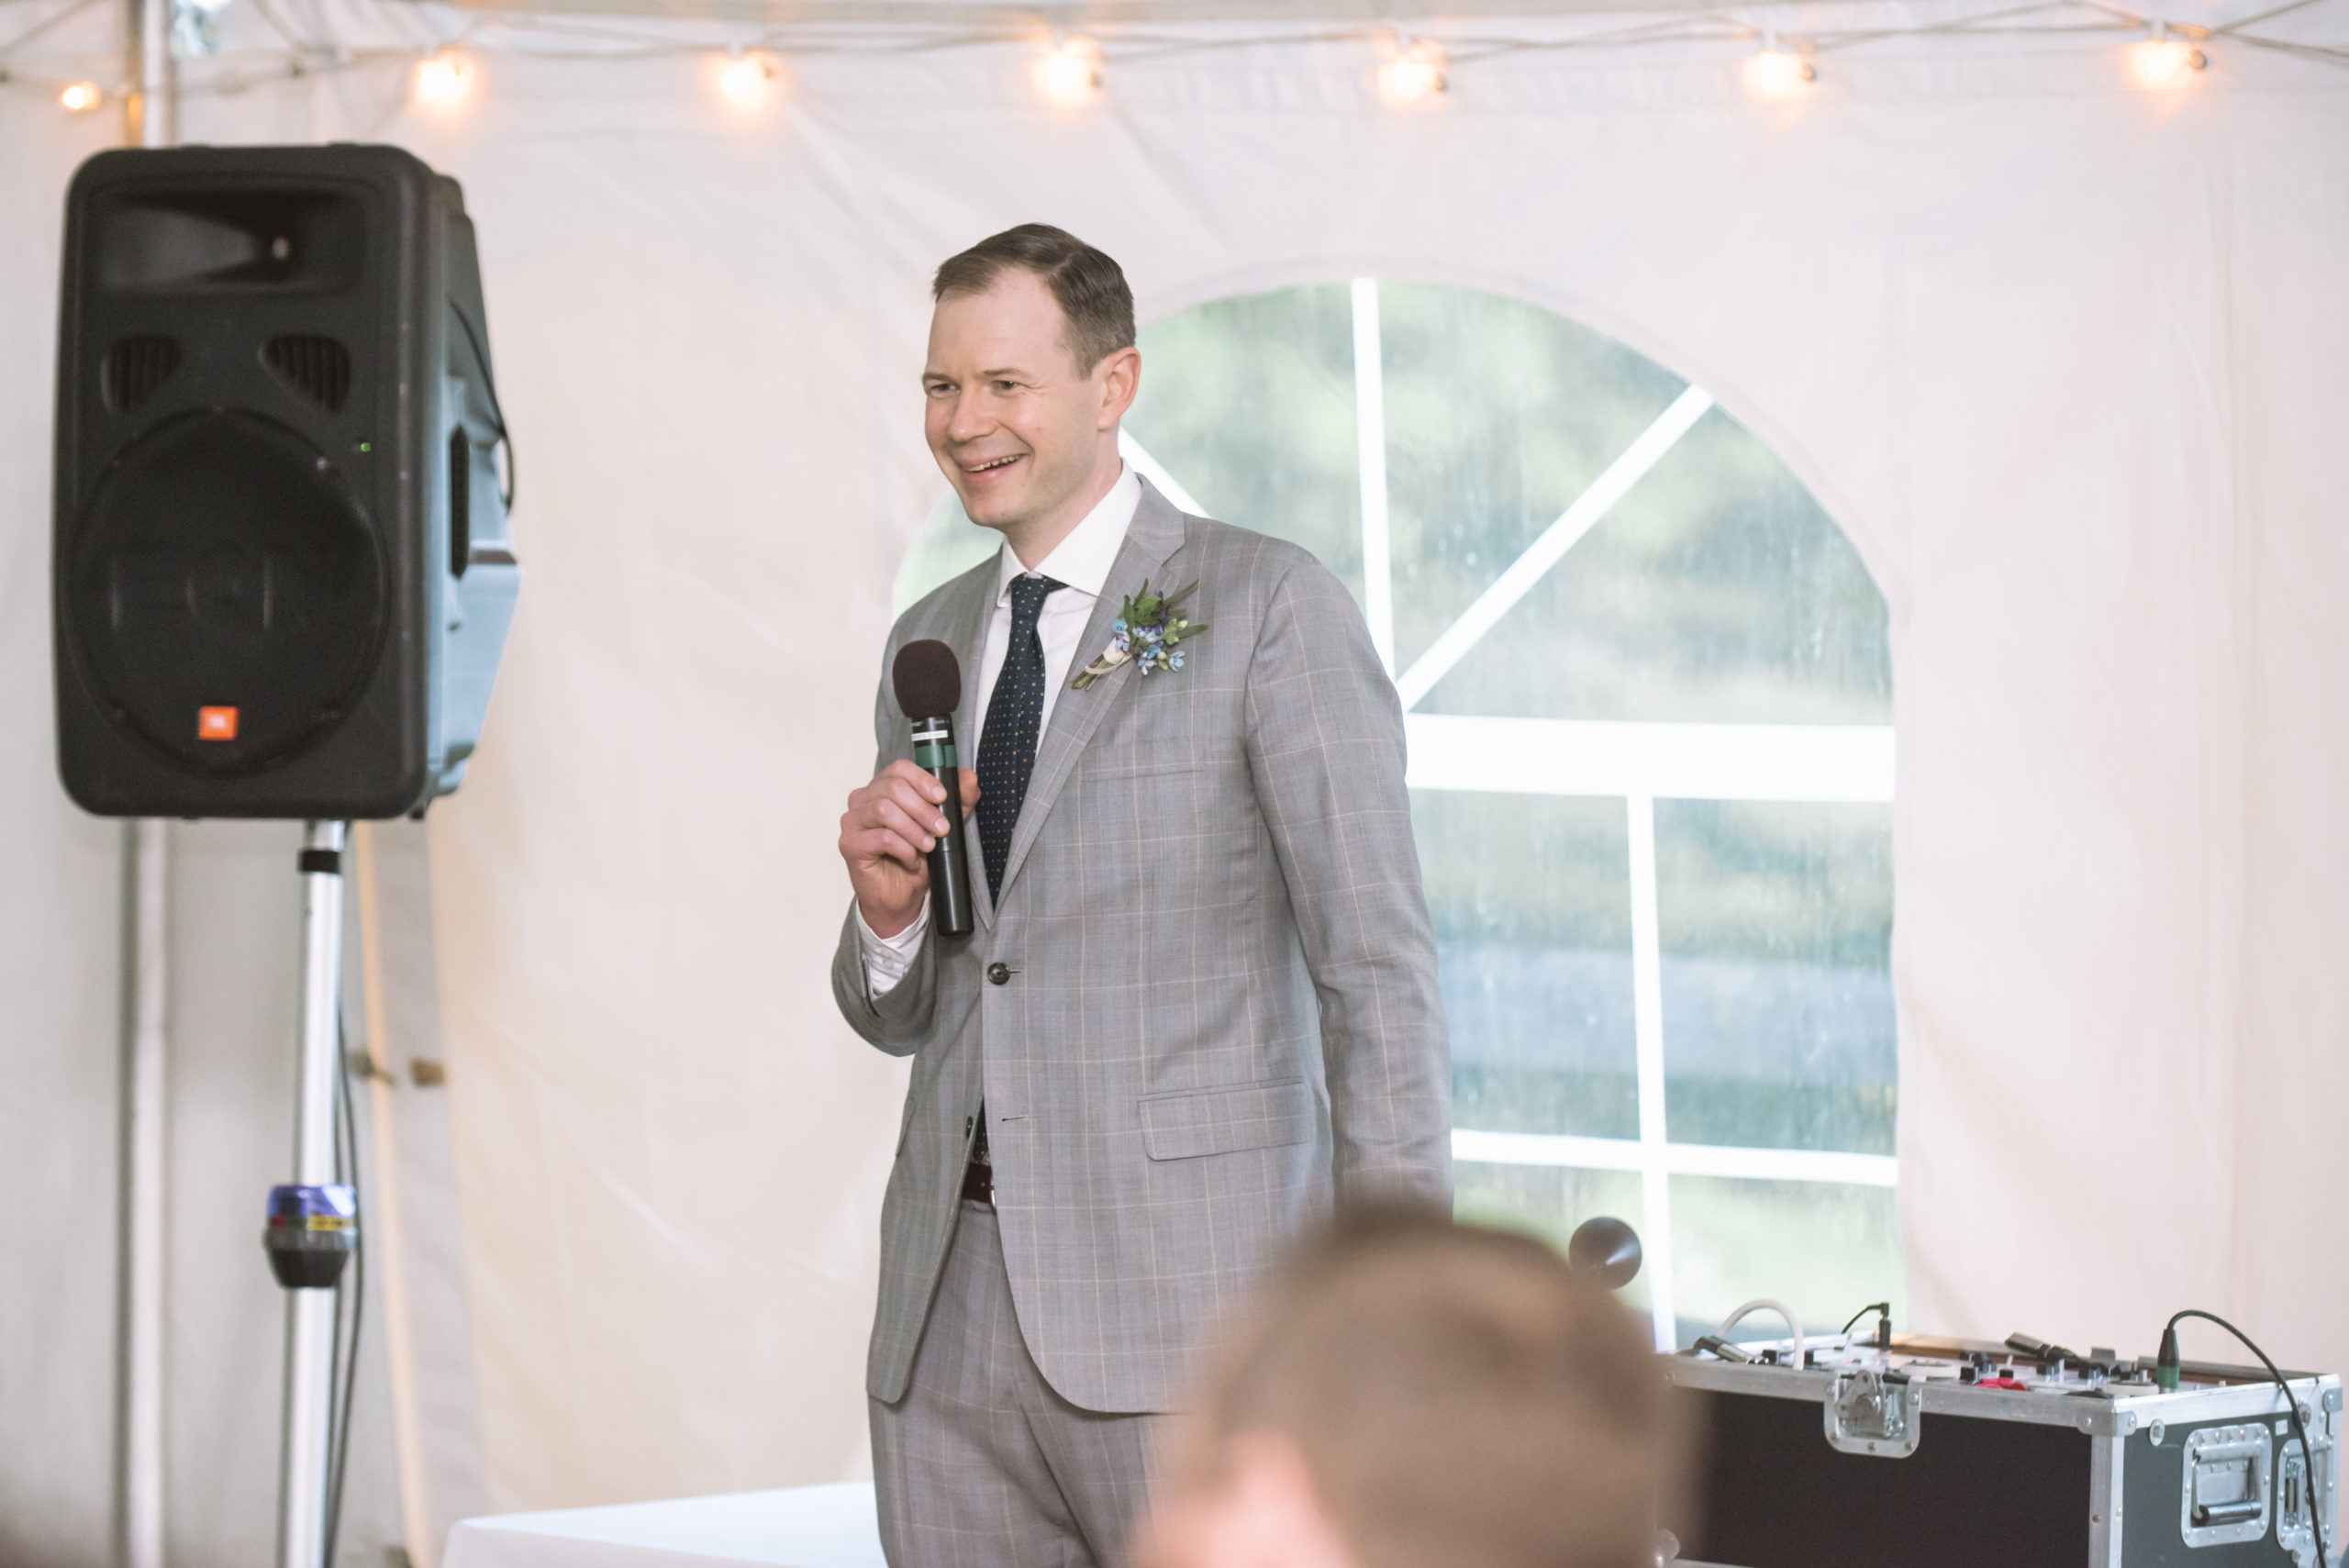 Brother of the groom, the best man, giving a speech during the tented-reception. He is holding a microphone and is open-mouthed smiling.